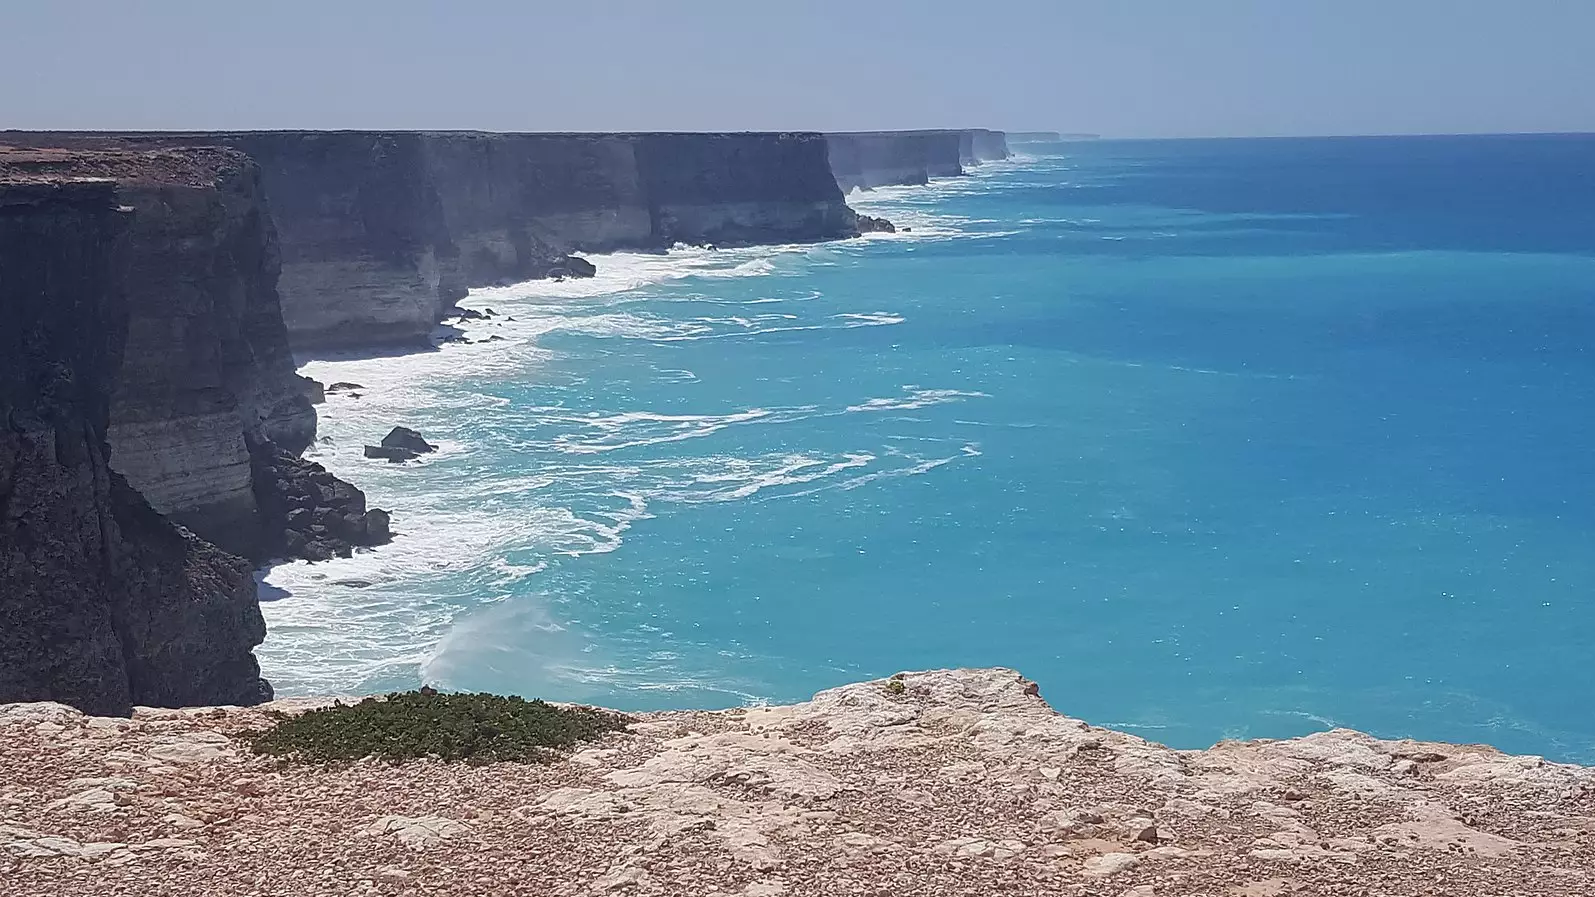 Company Abandons Plans To Drill For Oil In The Great Australian Bight